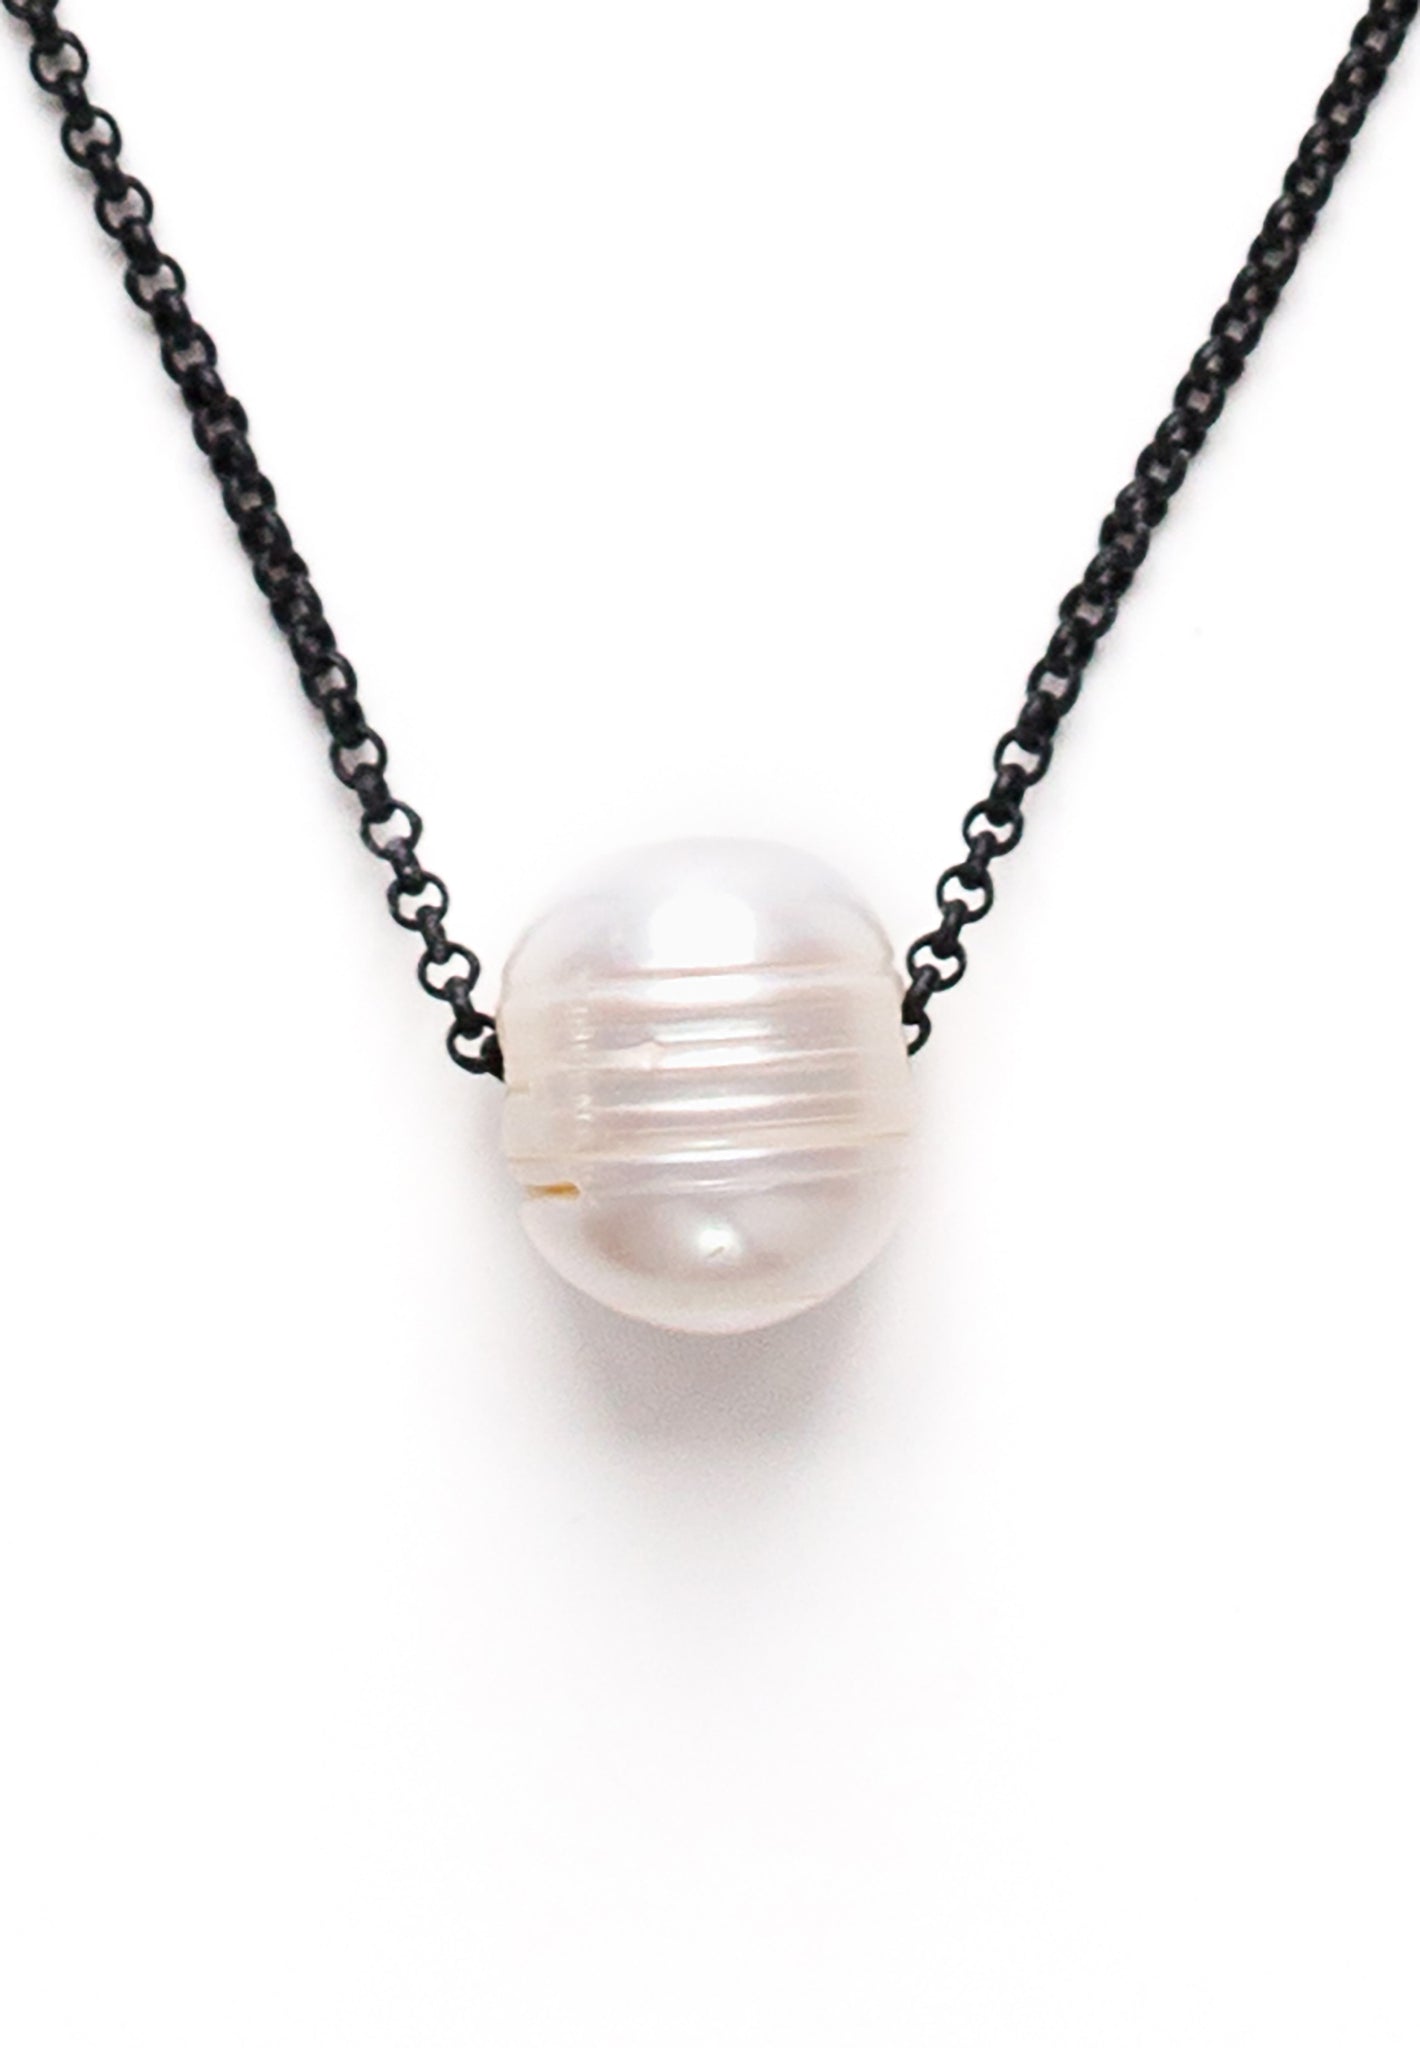 Freshwater Pearl Necklace on Black Chain